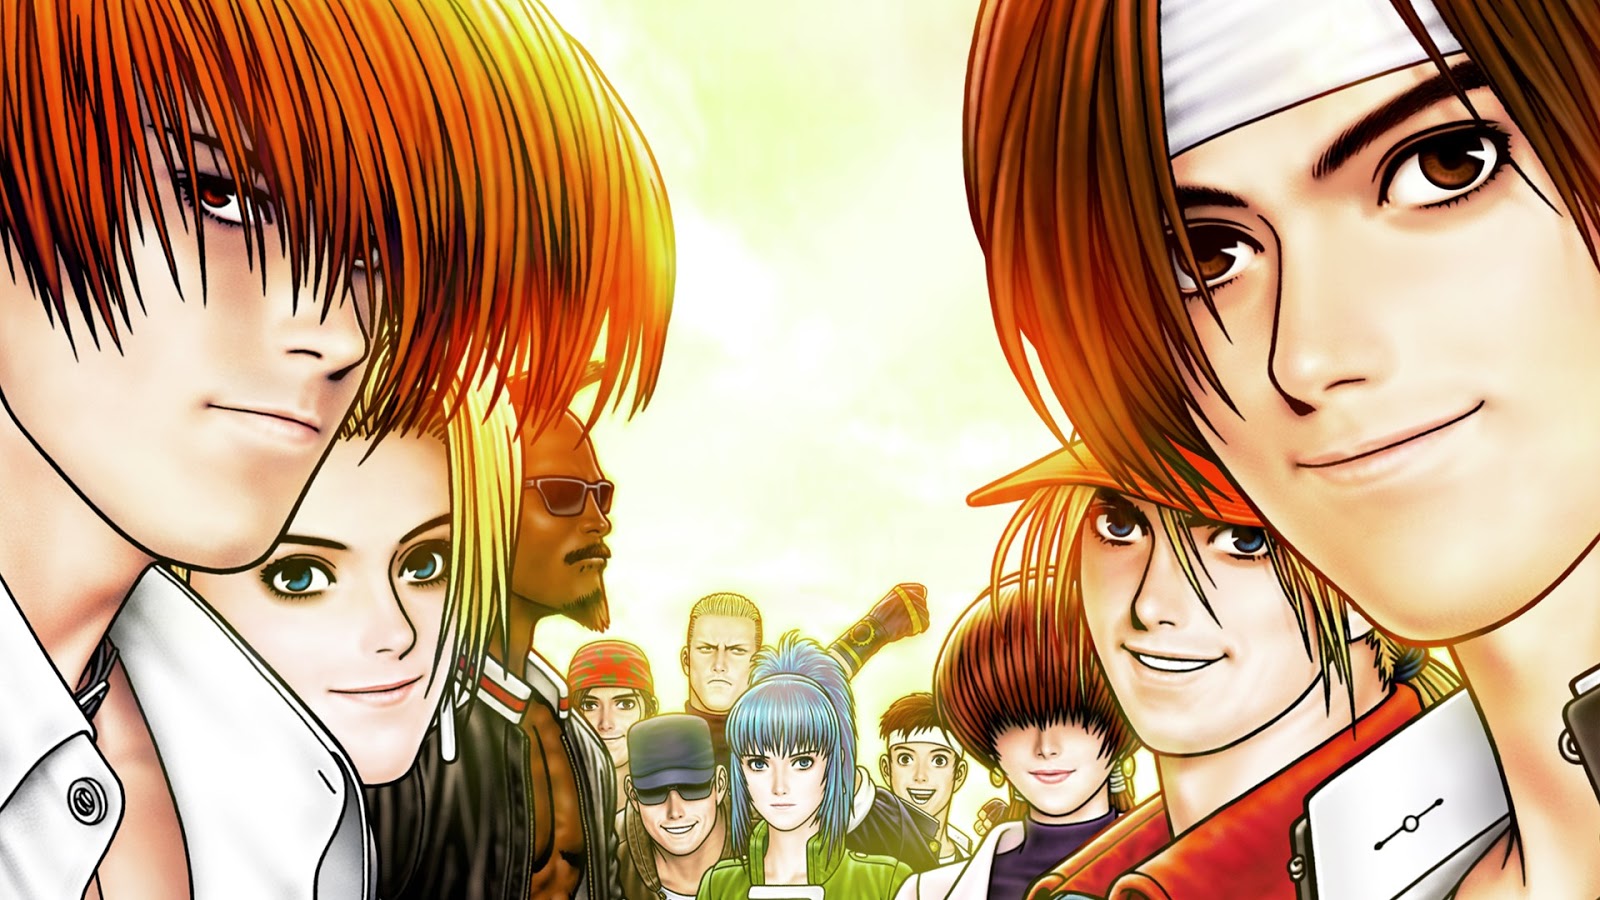 97 Orochi Team: Yashiro Nanakase, Shermie & Chris.  Chris kof, Mai king  of fighters, Snk king of fighters